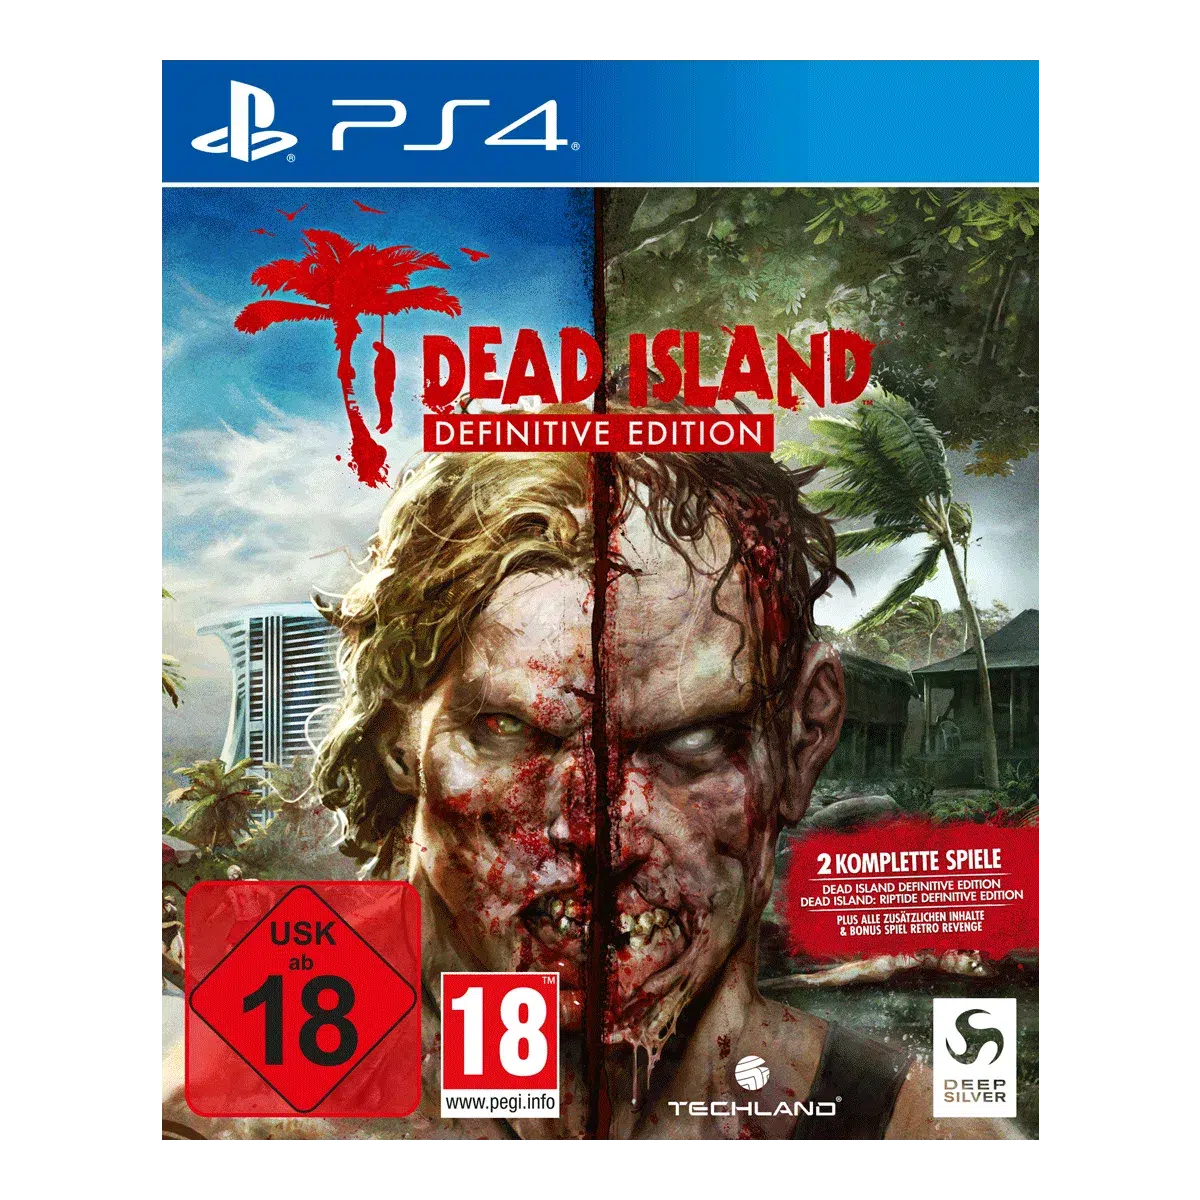 Dead Island Definitive Edition Collection (PS4)